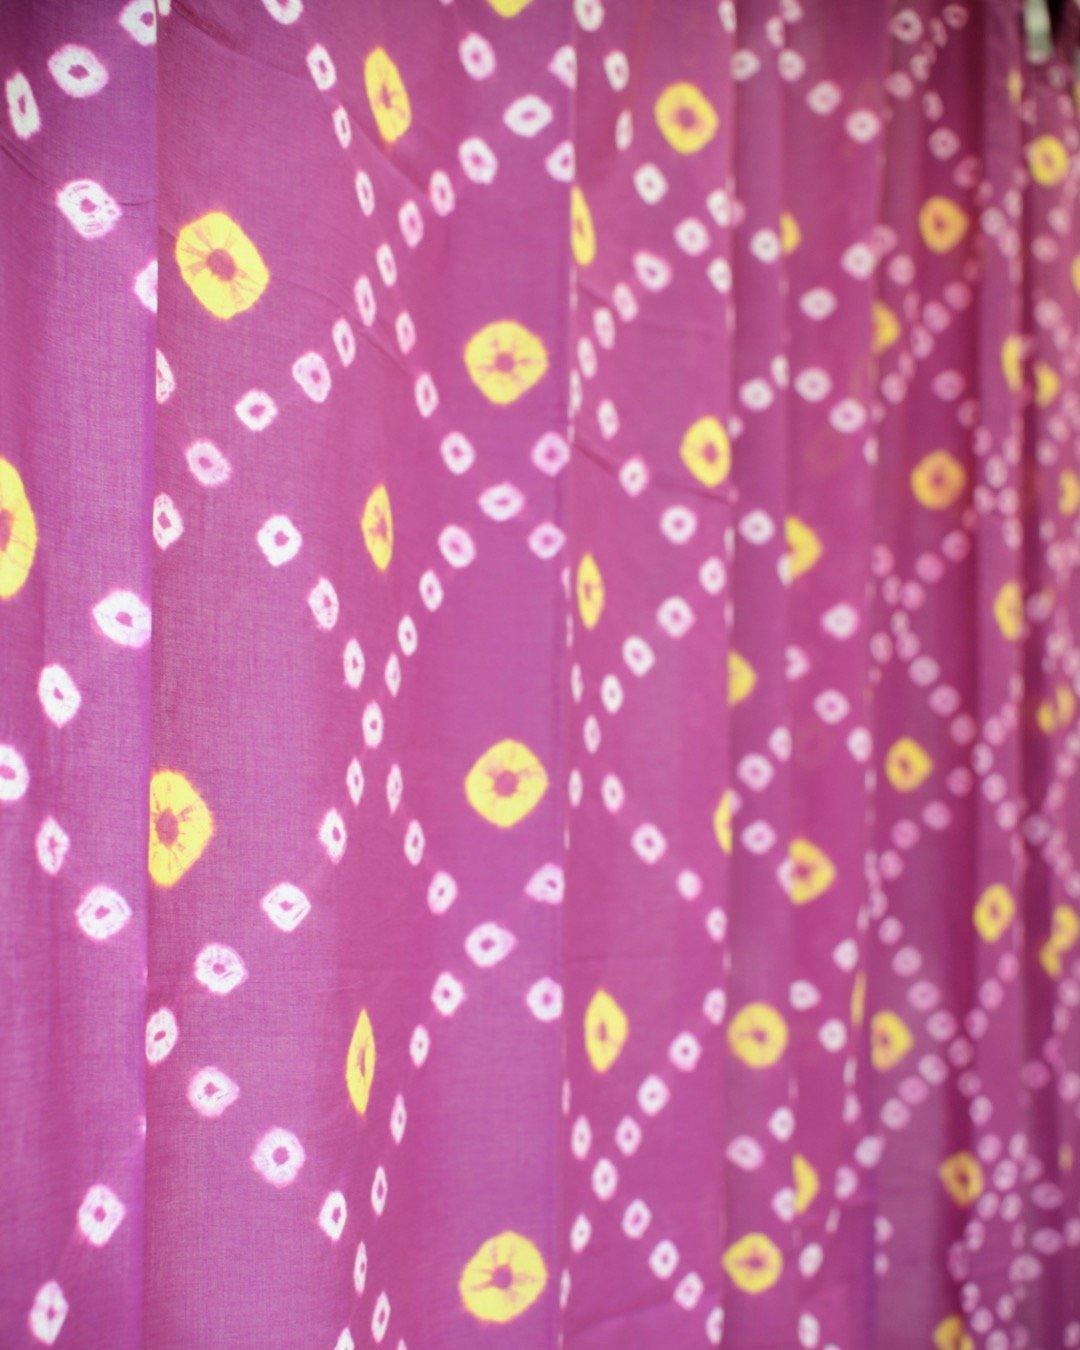 Details of purple and yellow bandhani fabric or curtain